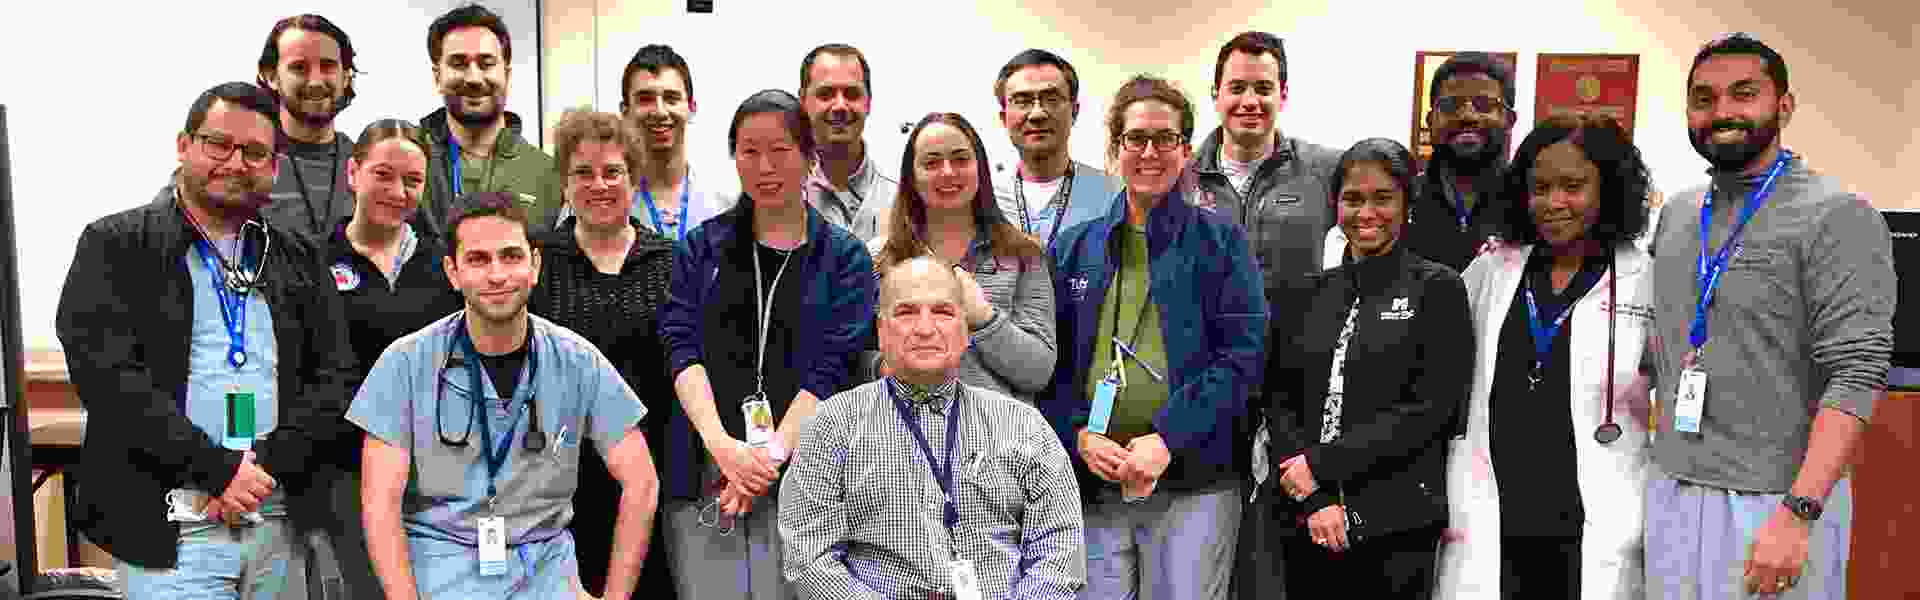 0. NEW CARDIO FELLOW PHOTO.png